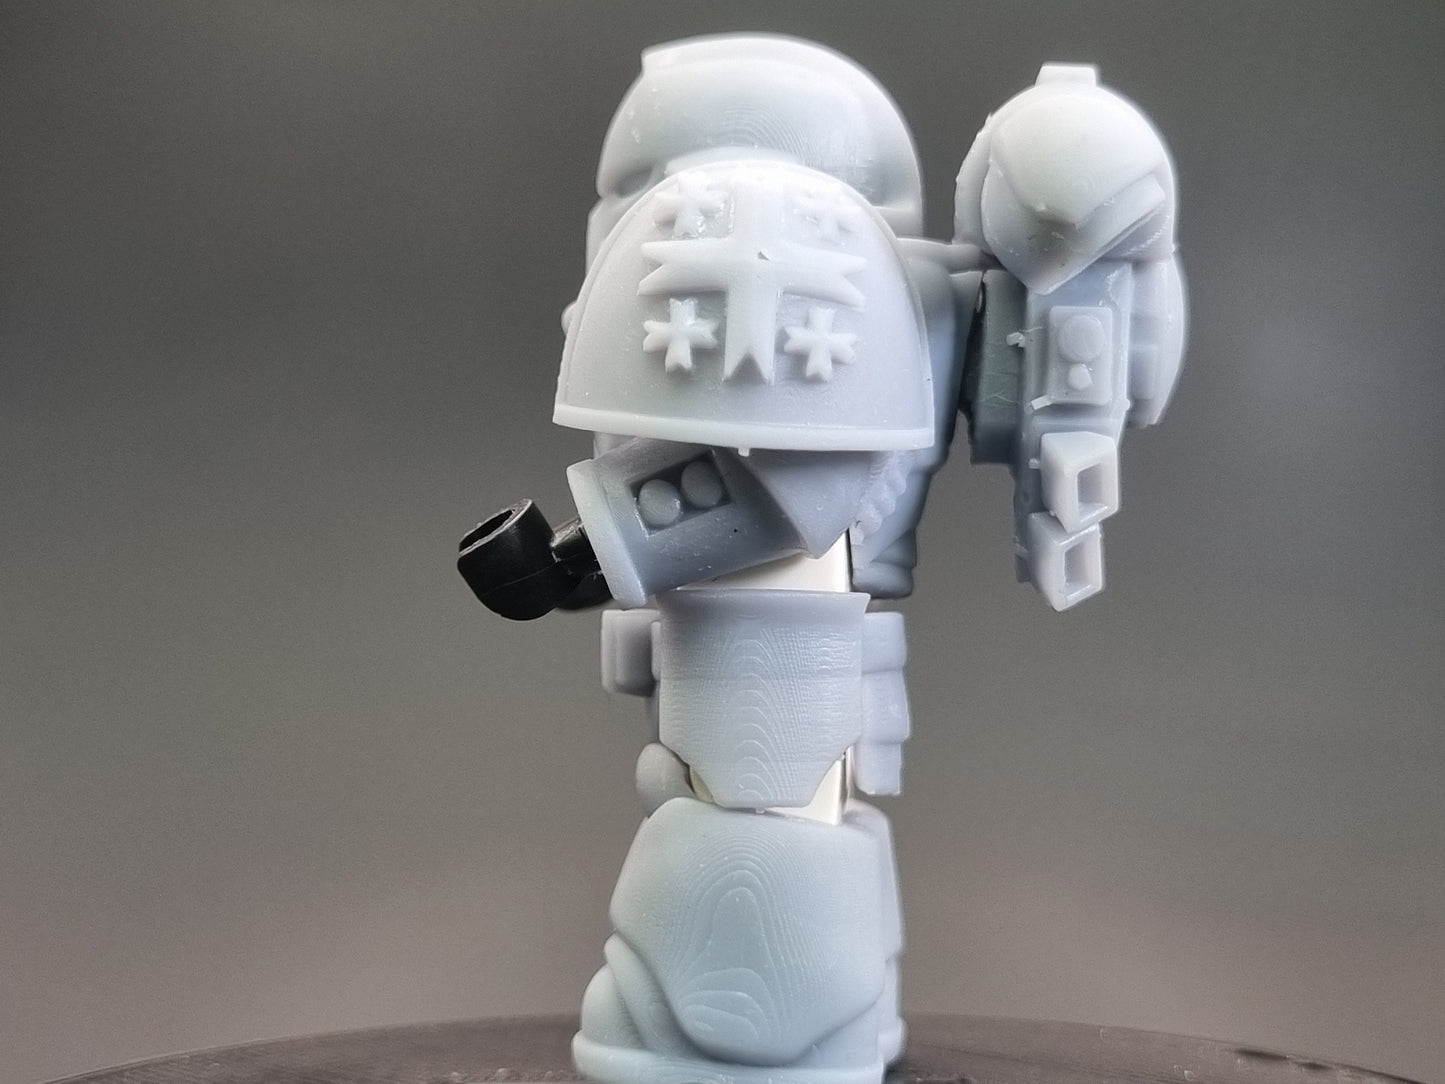 Building toy space warrior templar faction expension pack!